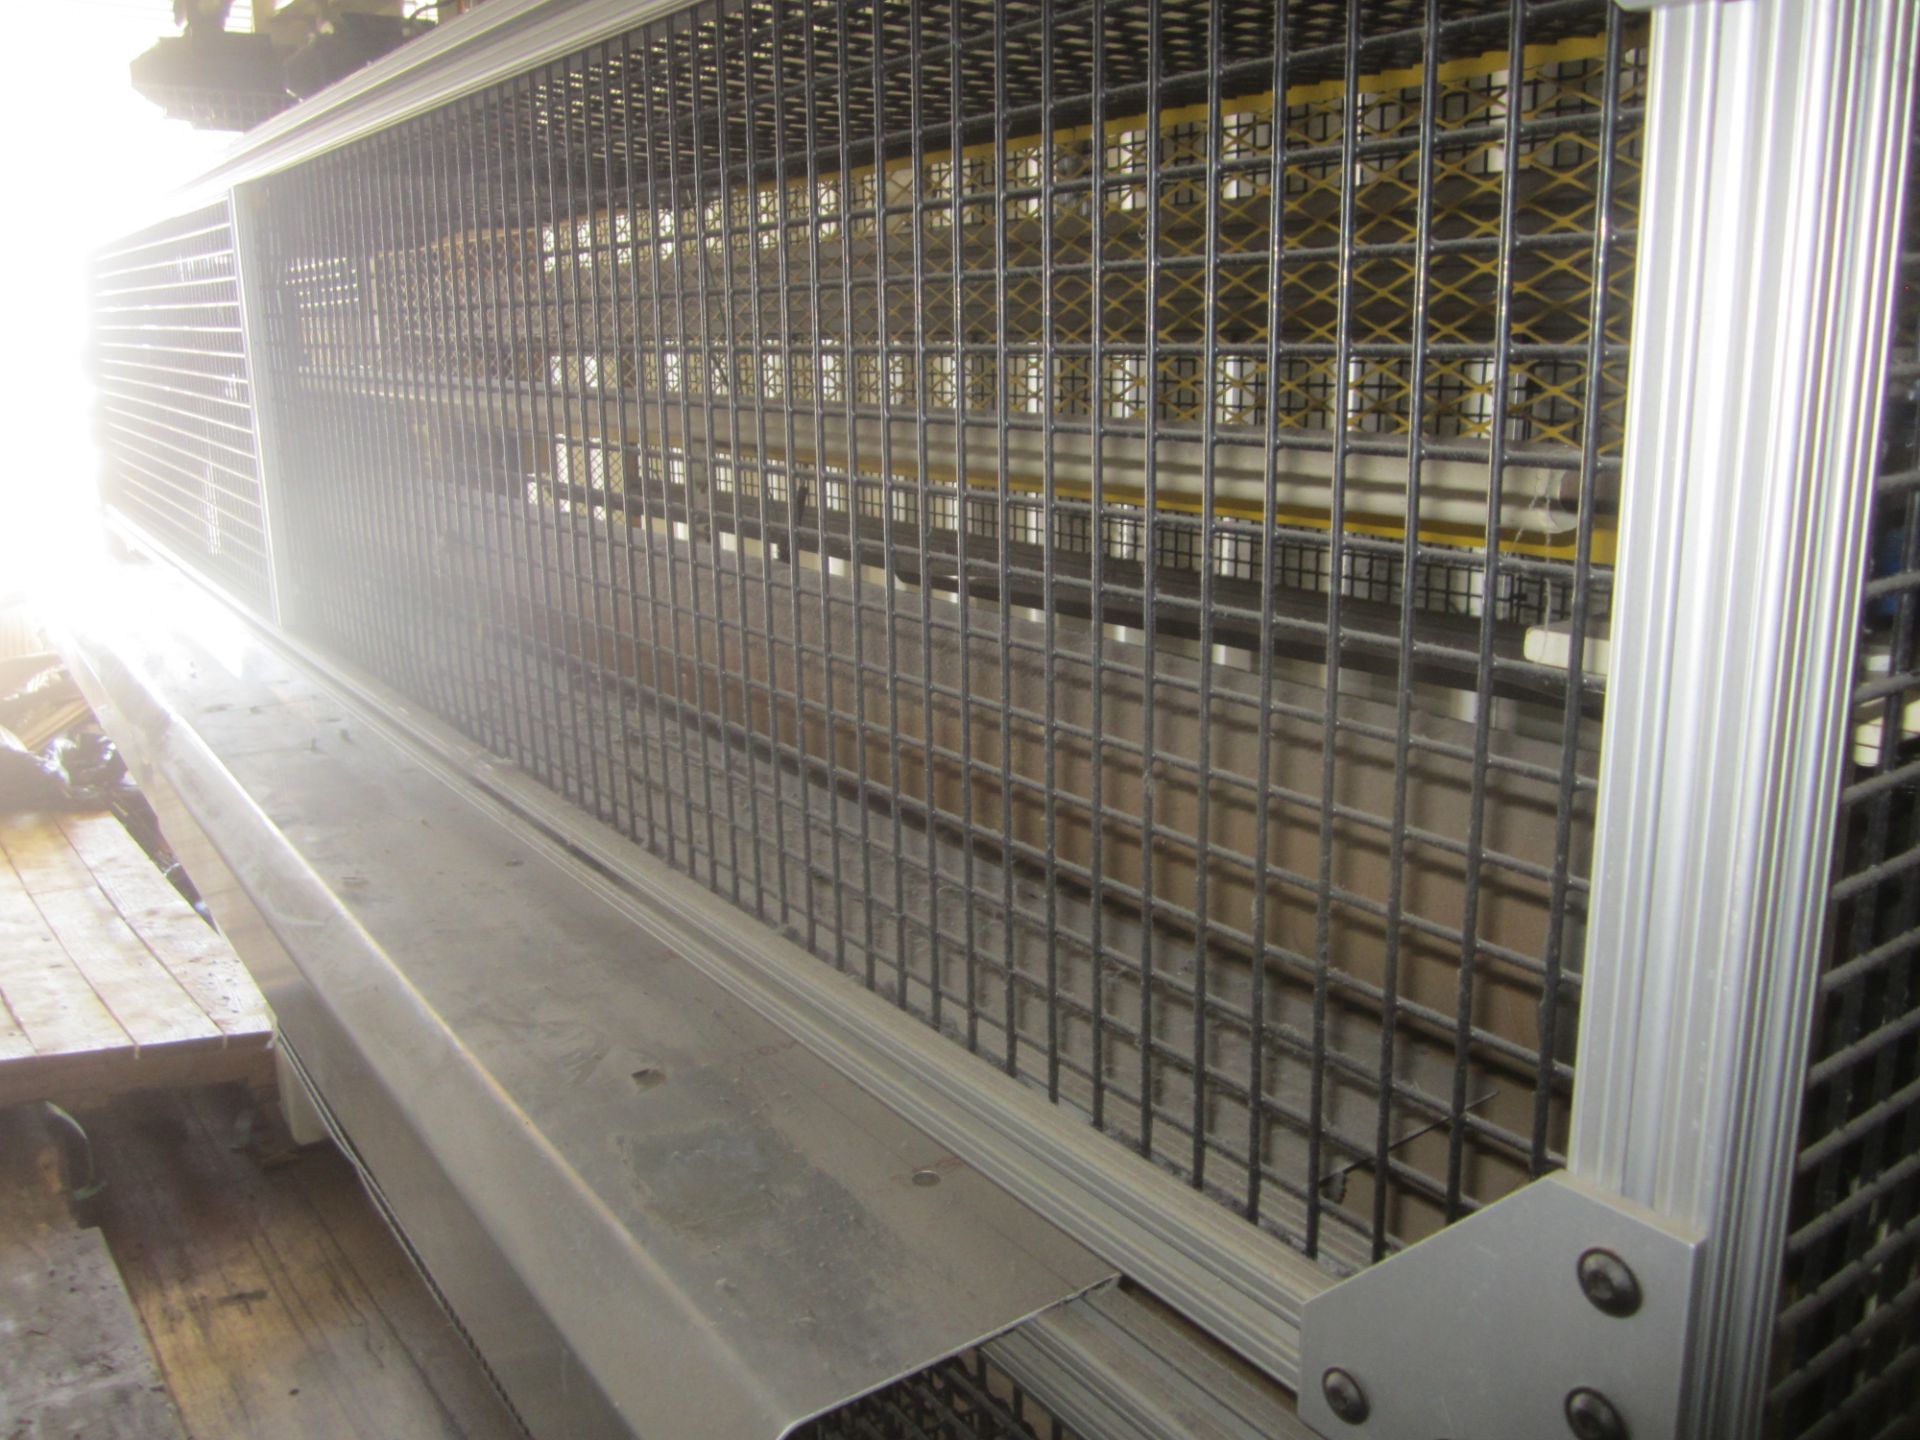 Birch Brothers Fabric Feed Roll/Cutter, s/n 1196-176, 8' Max. Material Width, Overhead Travelling - Image 6 of 15